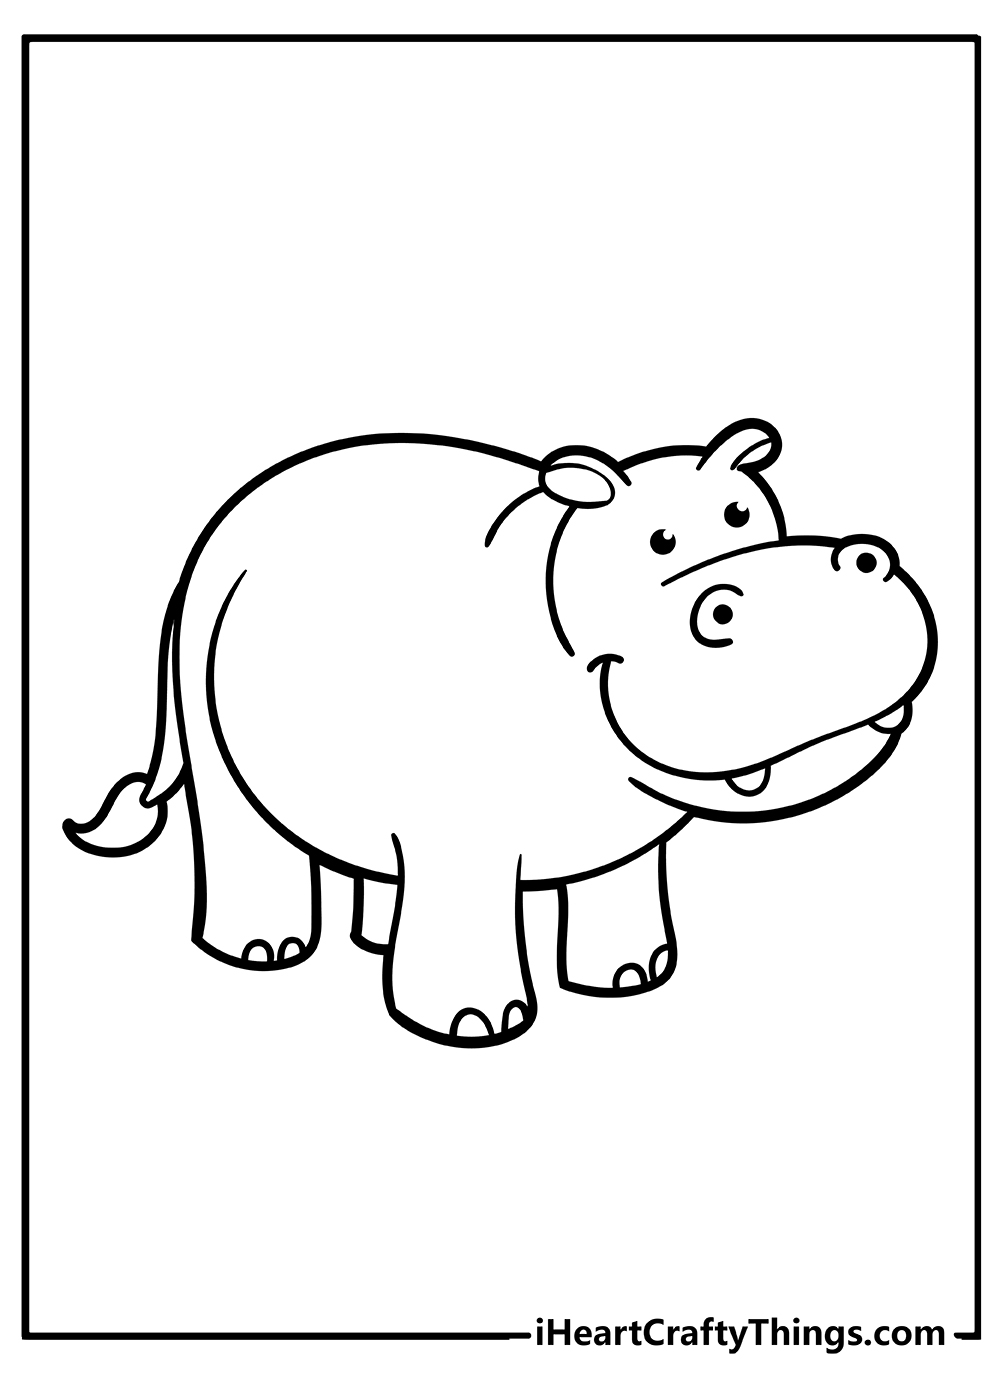 Hippo Coloring Pages for adults free printable